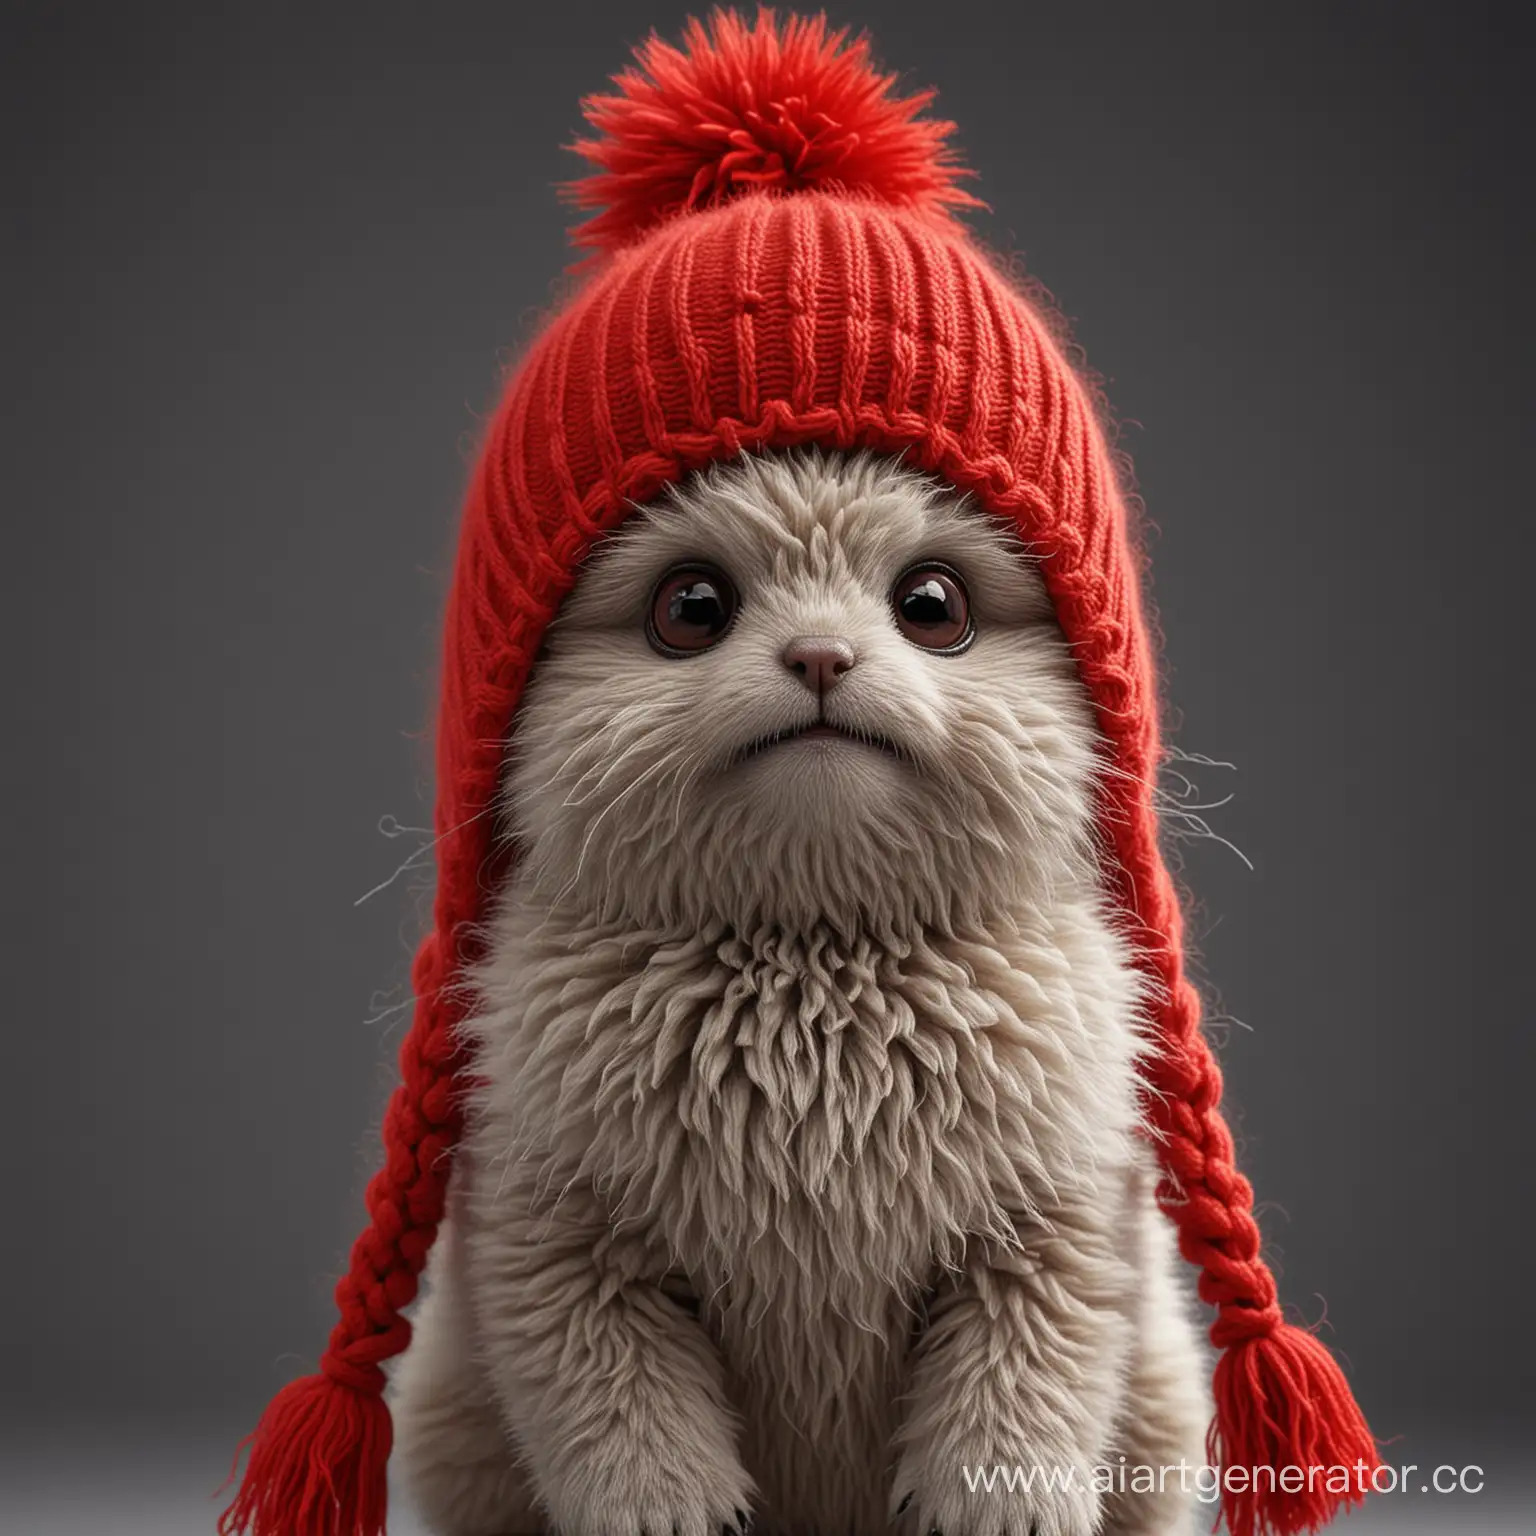 Adorable-Fluffy-Creature-in-Red-Knitted-Hat-High-Detail-4K-CloseUp-Photo